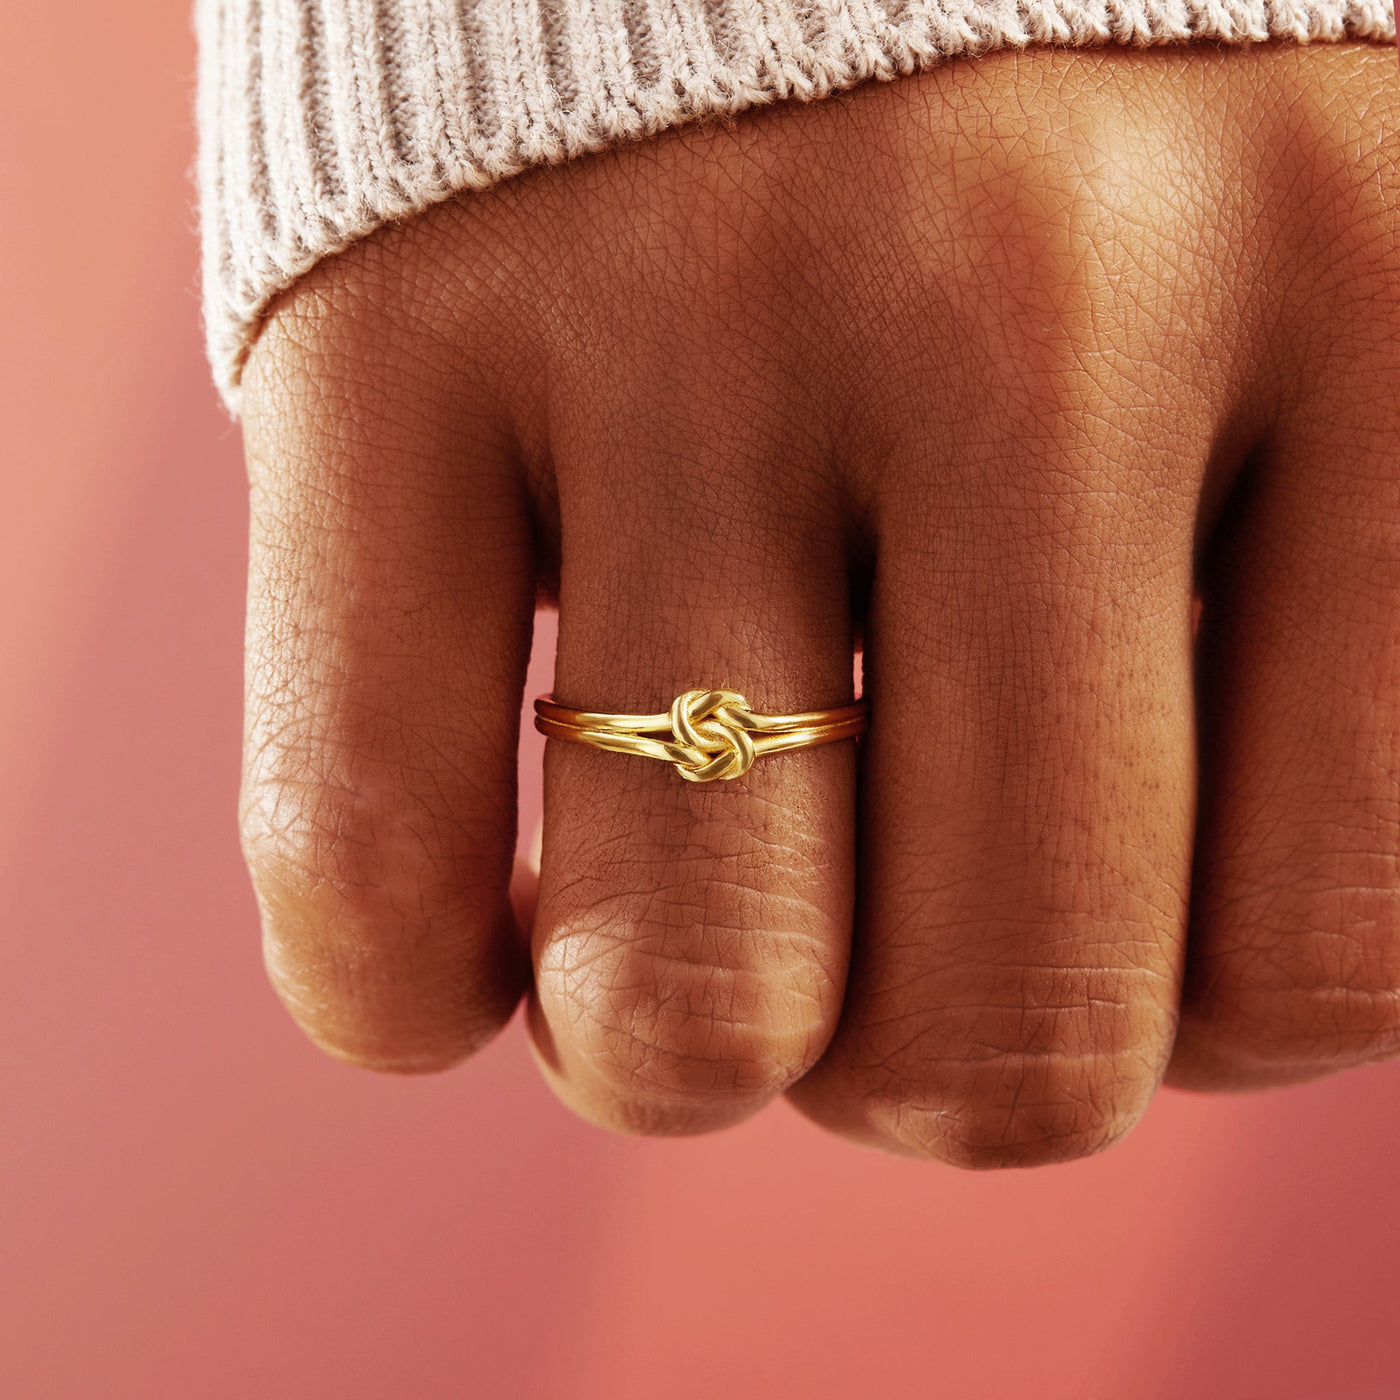 PROMISE DOUBLE SQUARE KNOT RING